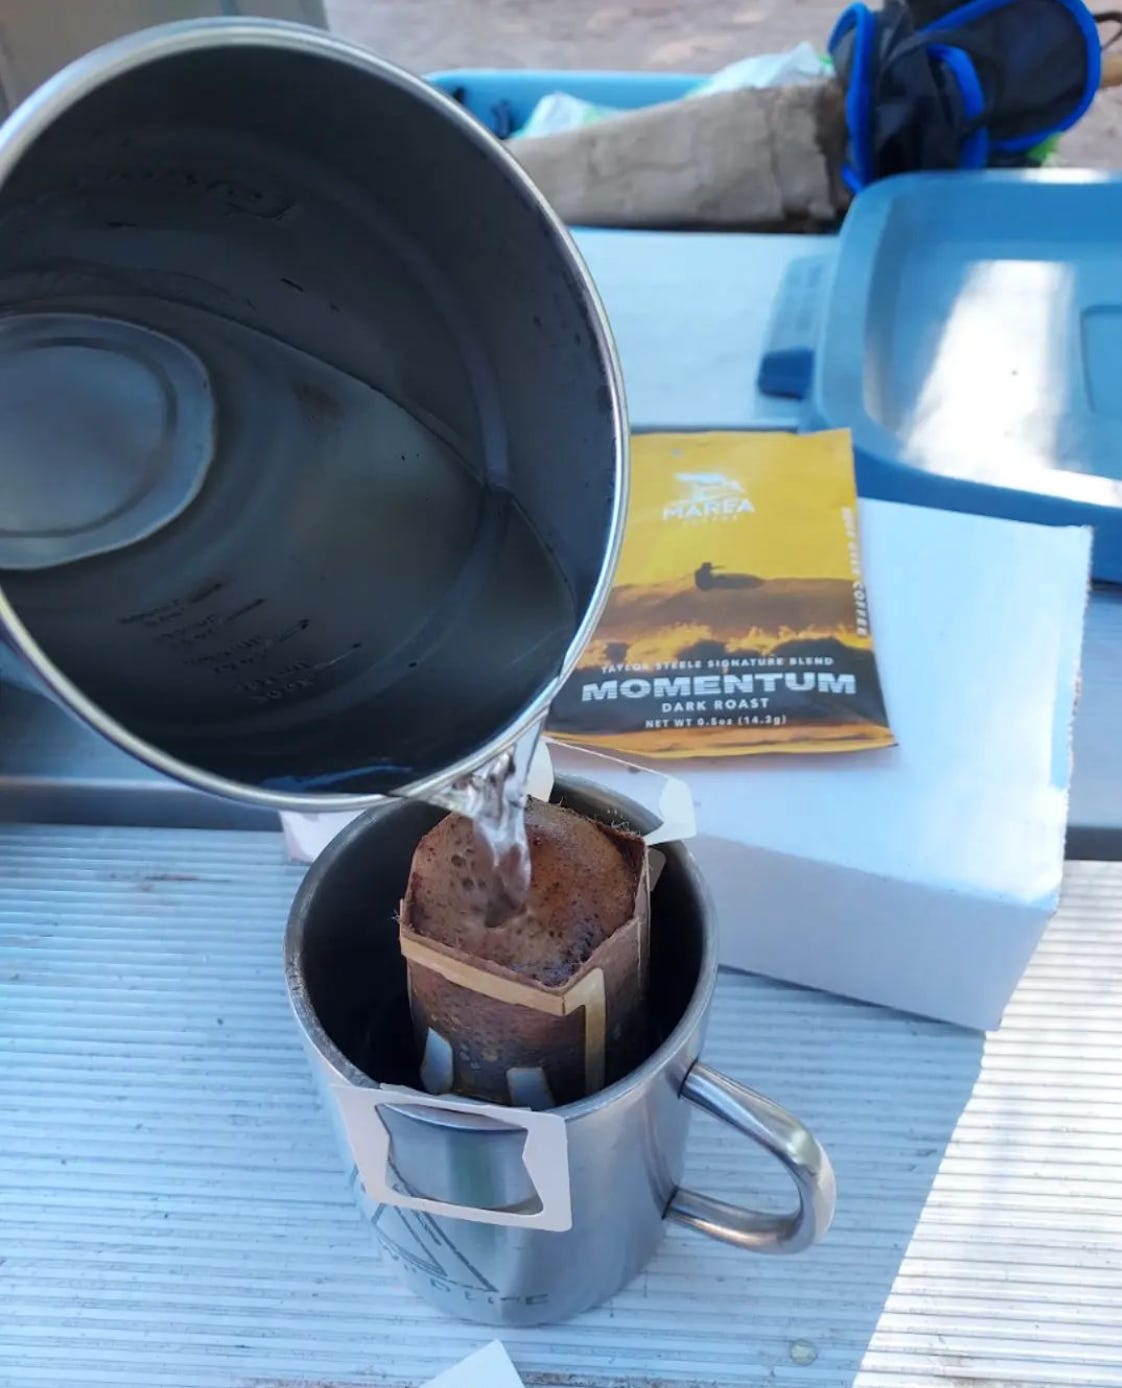 Hot water from a stainless steel Stanley camp pot is being poured over a single-serving pourover coffee in a silver camp mug on a picnic table.